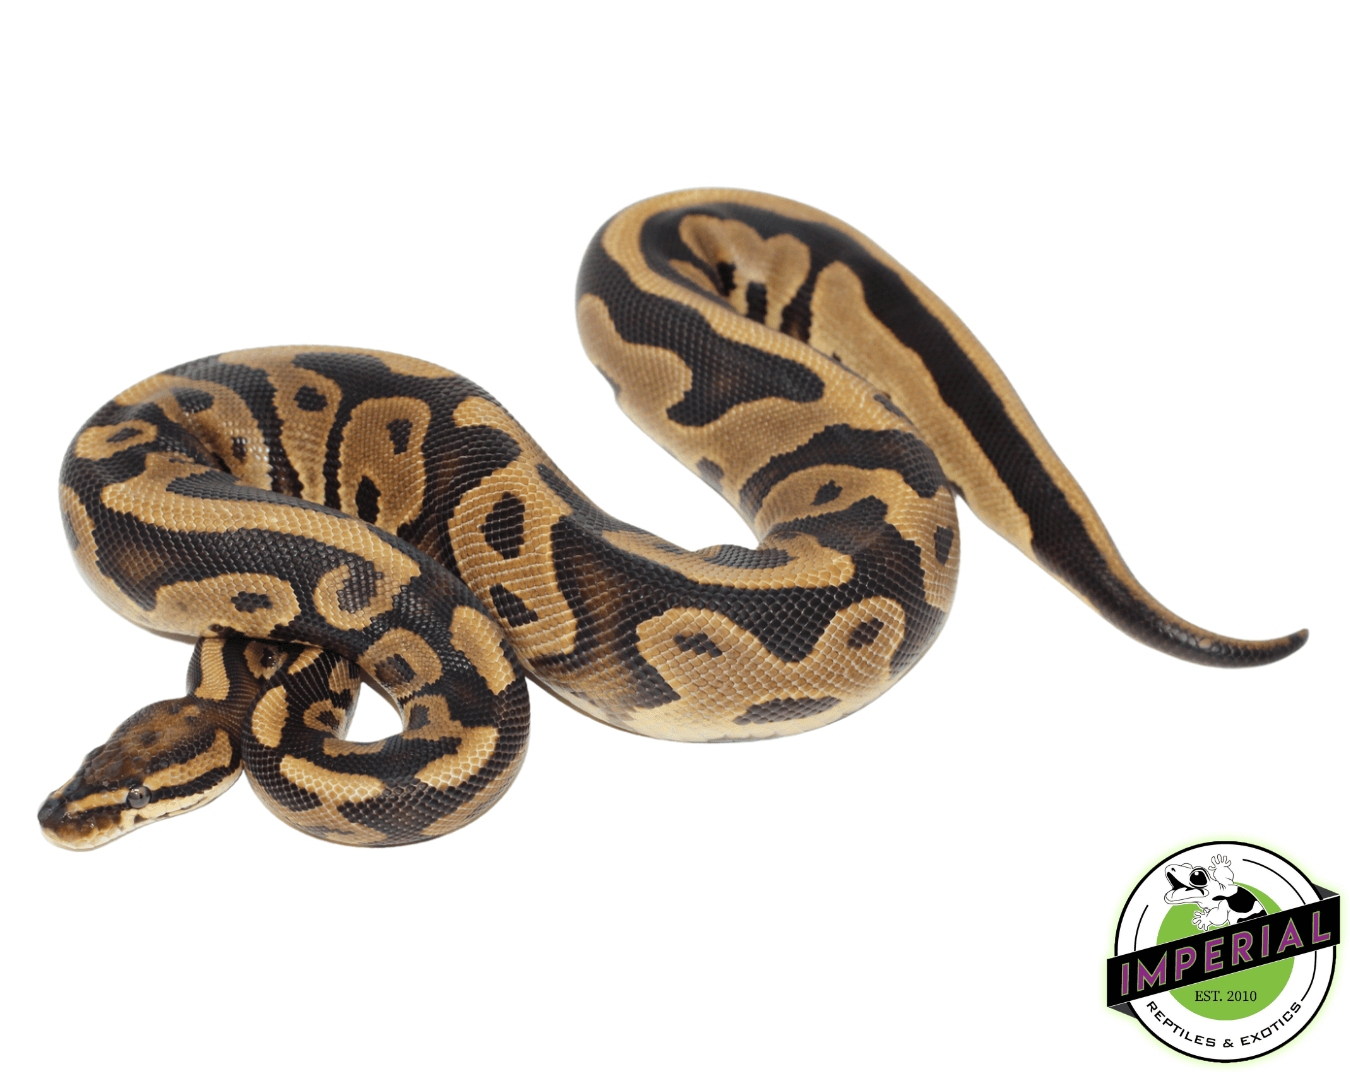 Specter Leopard ball python for sale, buy reptiles online